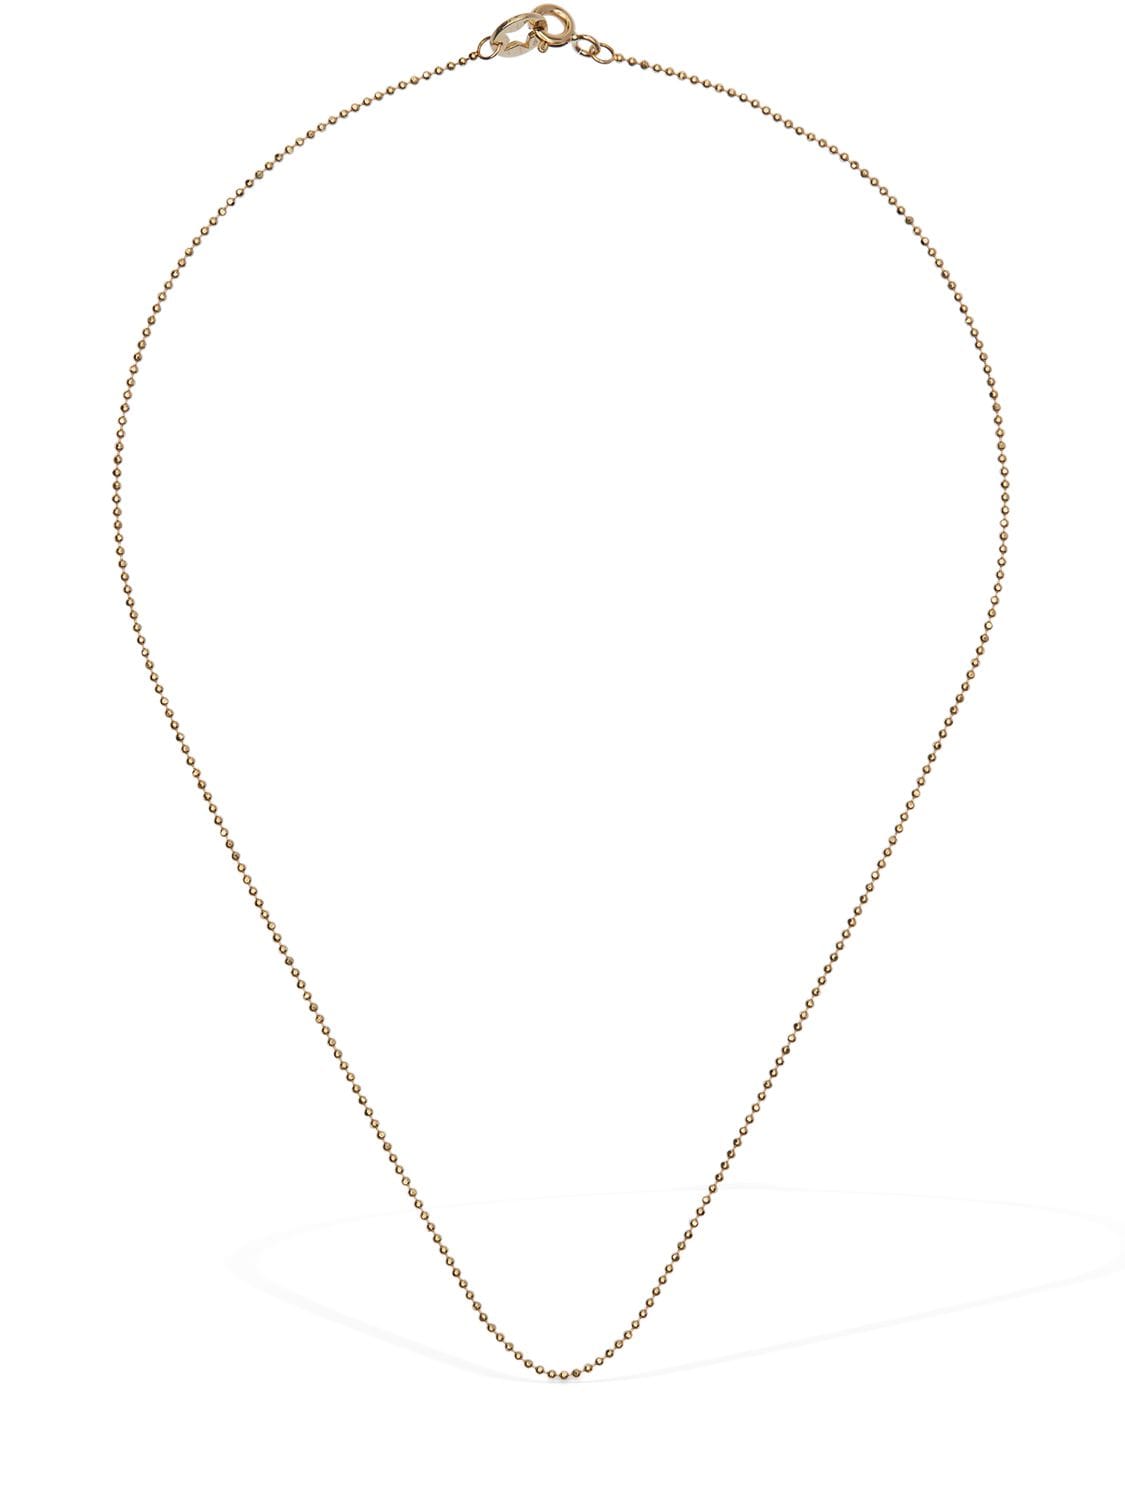 Image of 35cm 18kt Gold Nude Choker